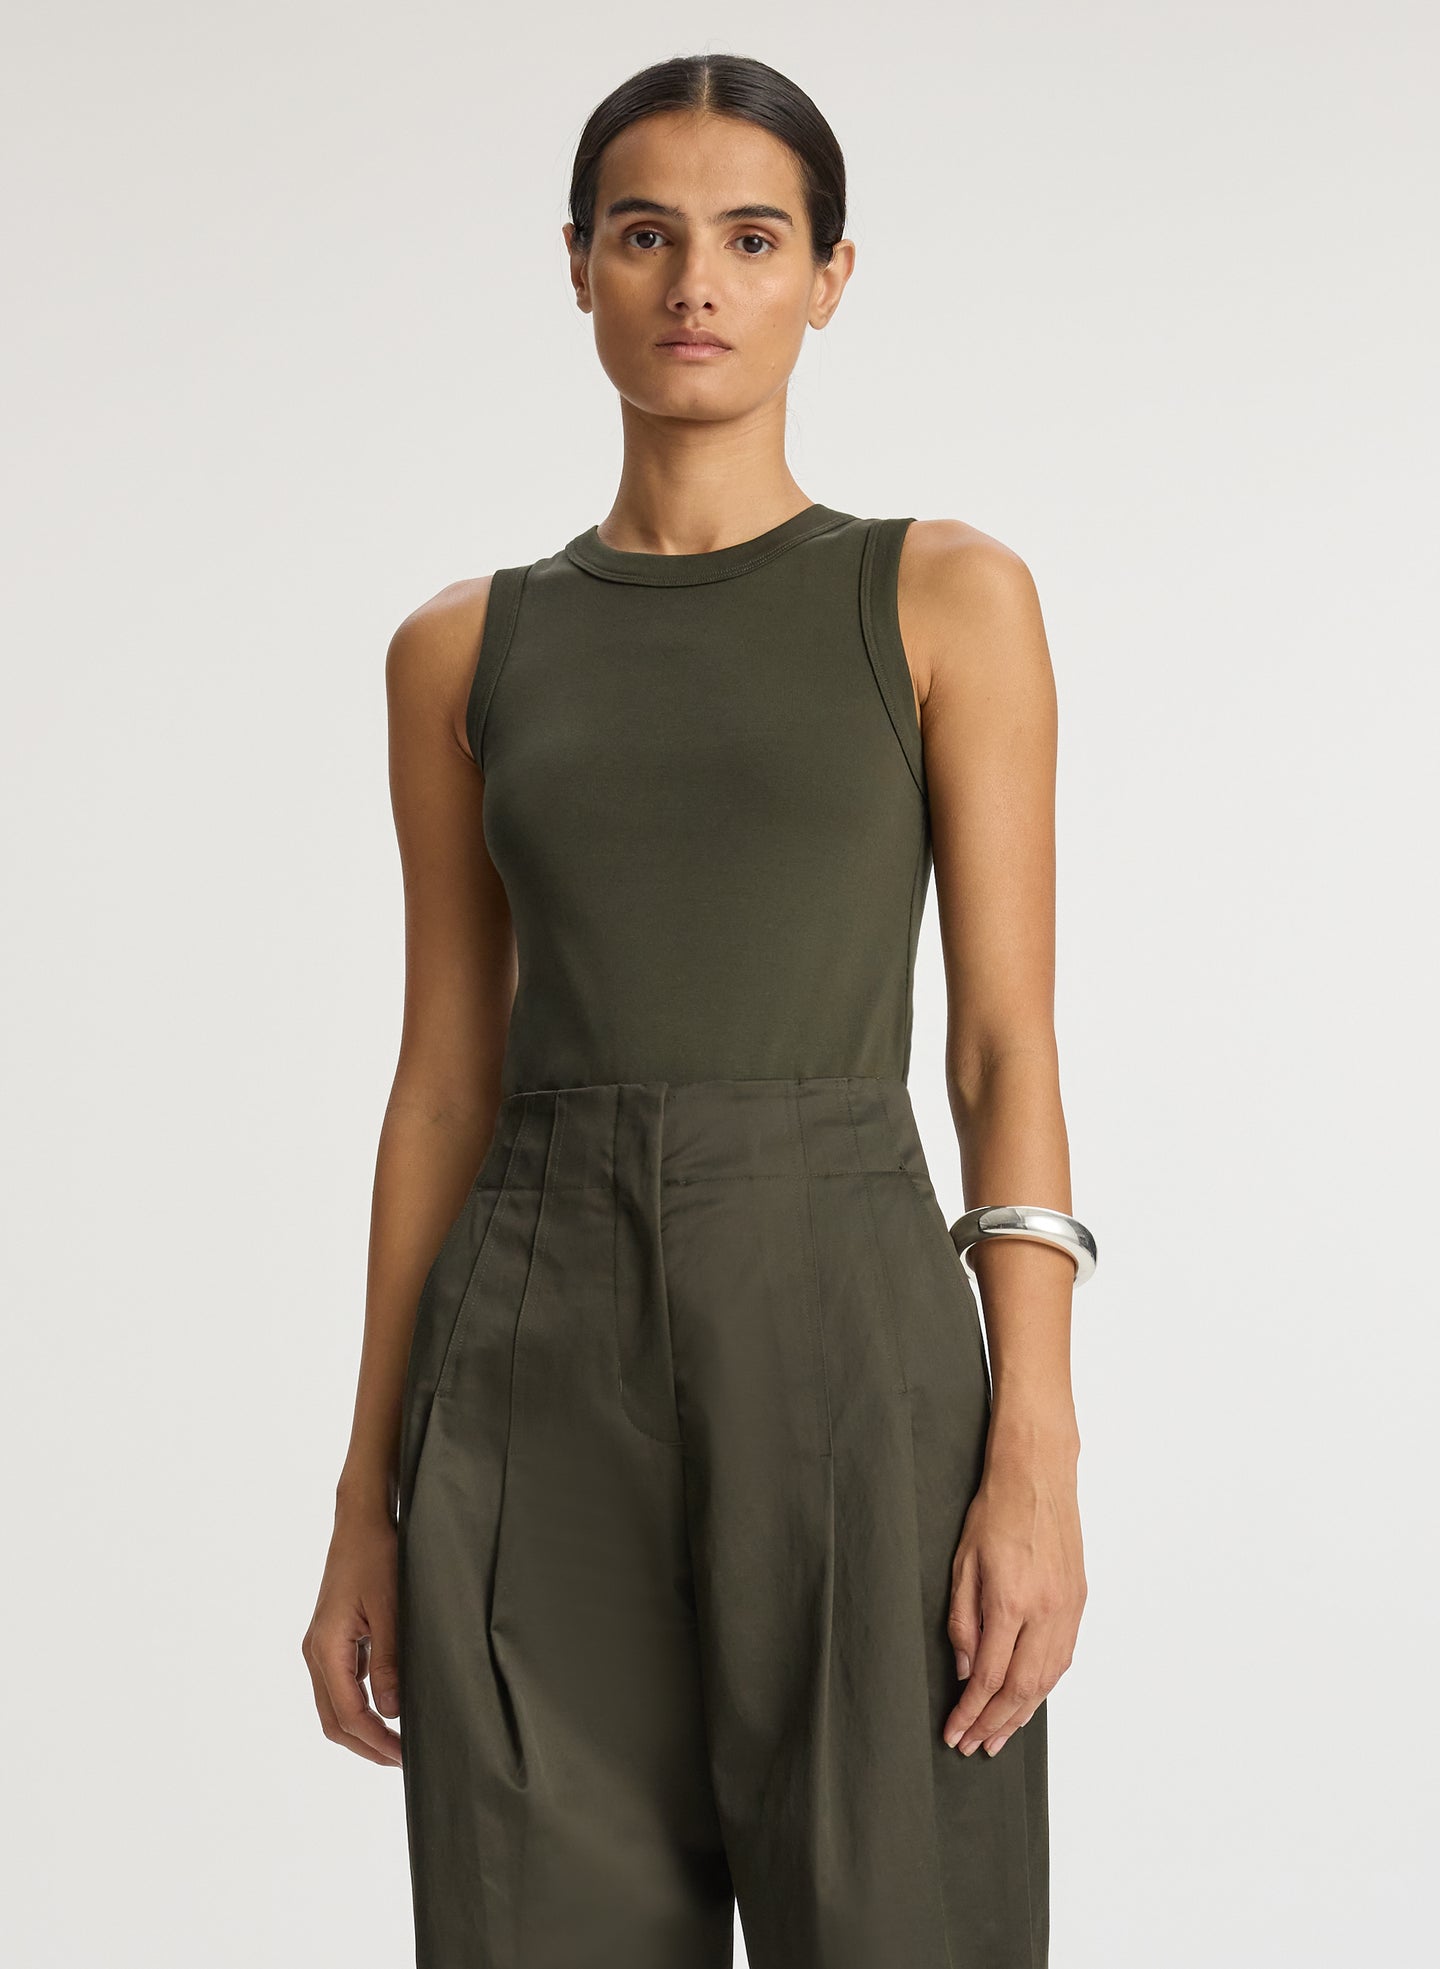 detail view of woman wearing olive green tank top and olive green wide leg sateen pants